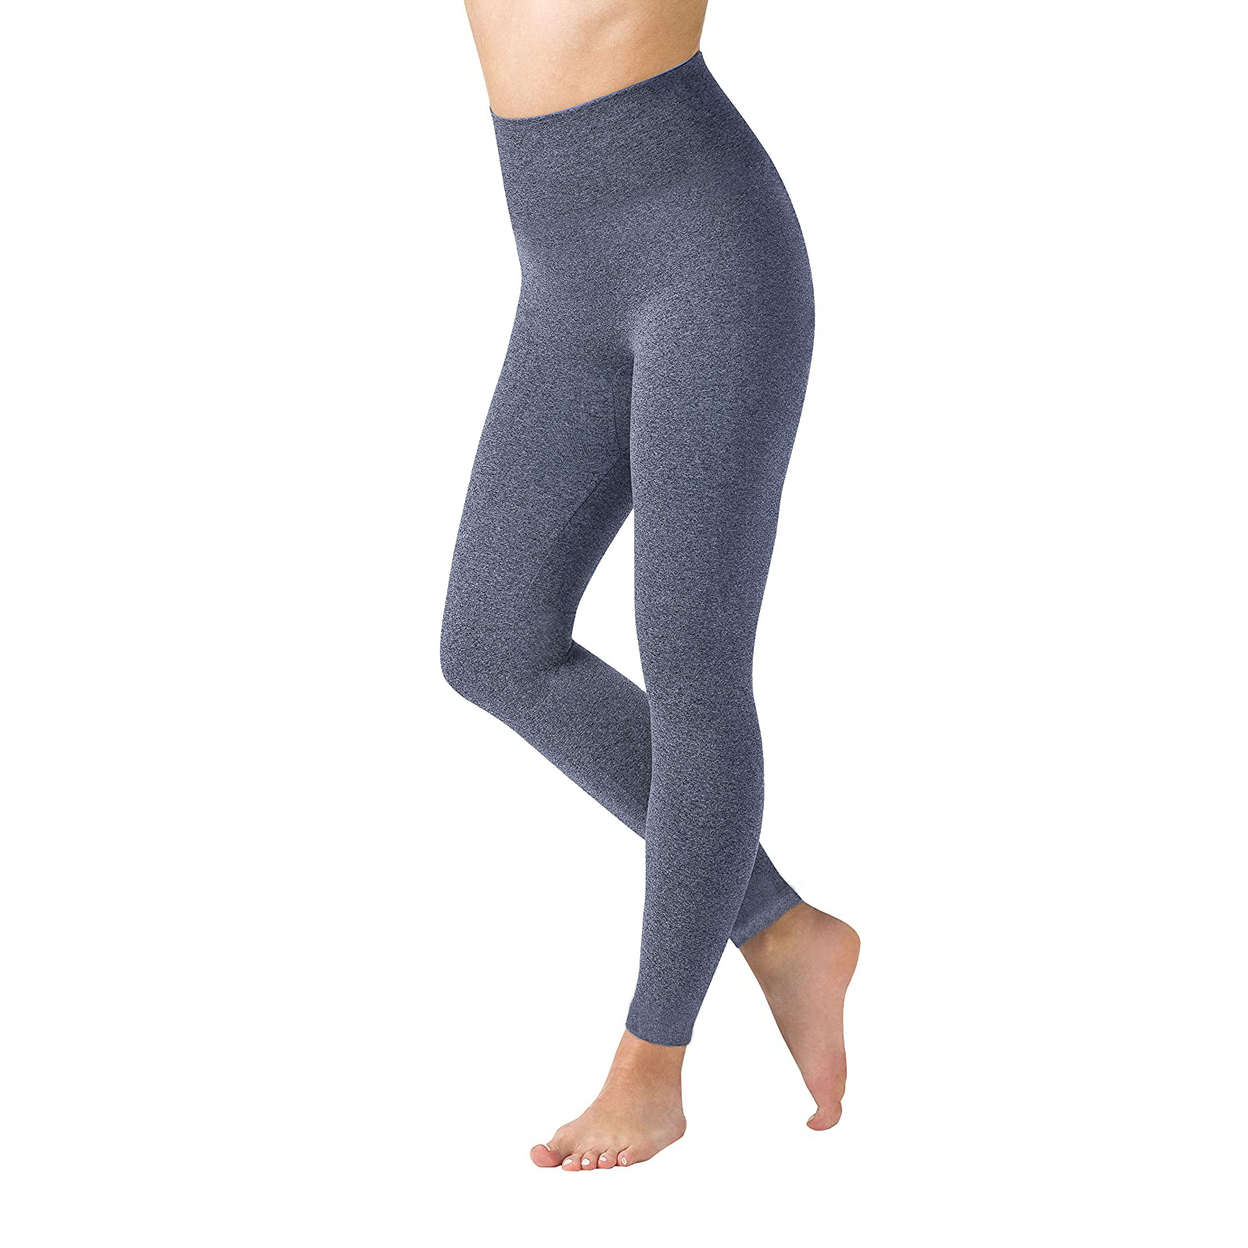 Multi-Pack: Women's High Waisted Ultra-Soft Fleece Lined Warm Marled Leggings(Available In Plus Sizes) - 2-pack, Assorted, Small